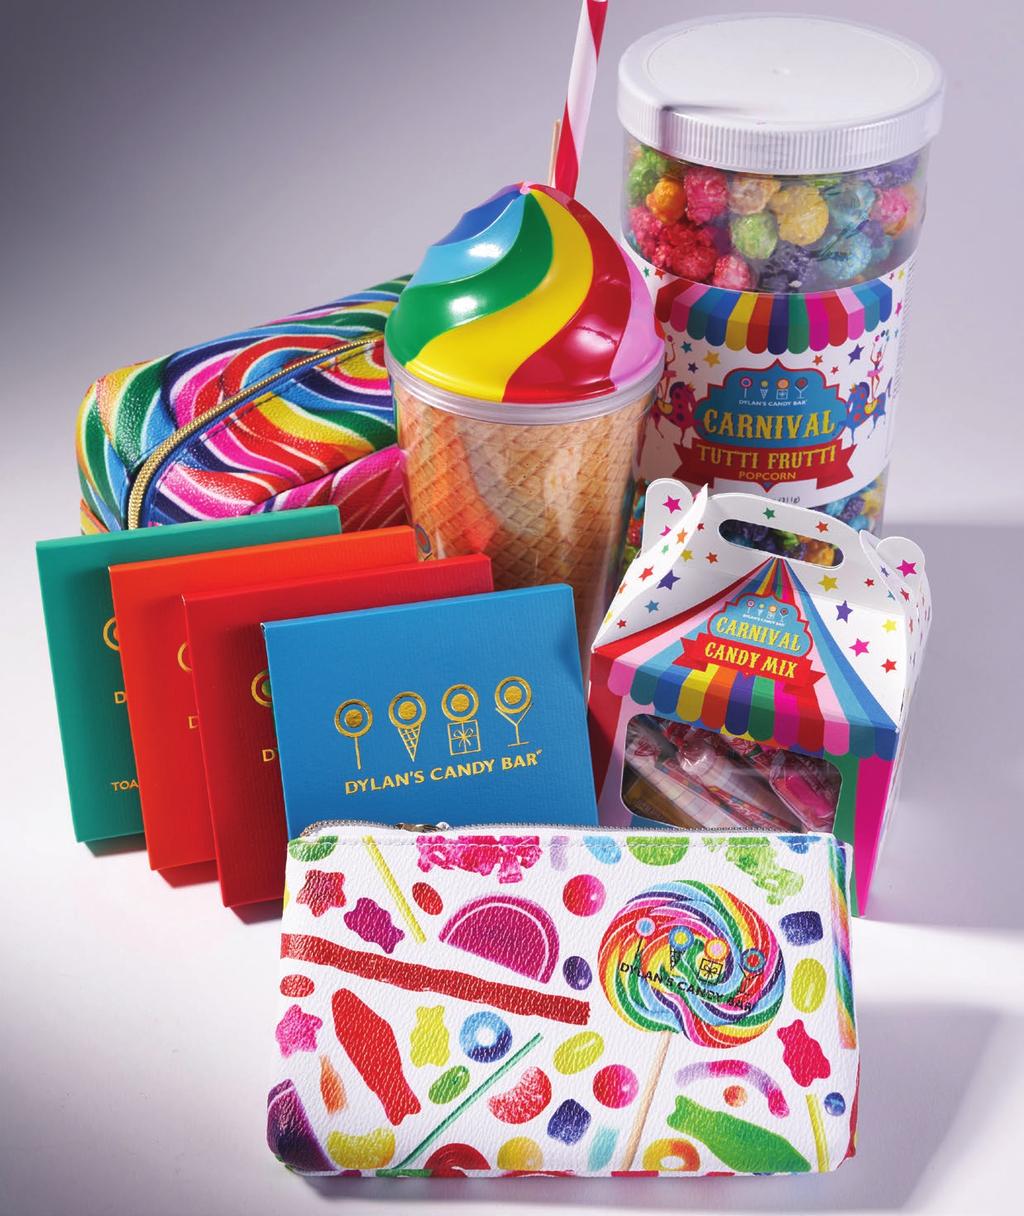 FOR THE SWEET TOOTH: Candy and chocolate and Toffee to Go give your loved ones